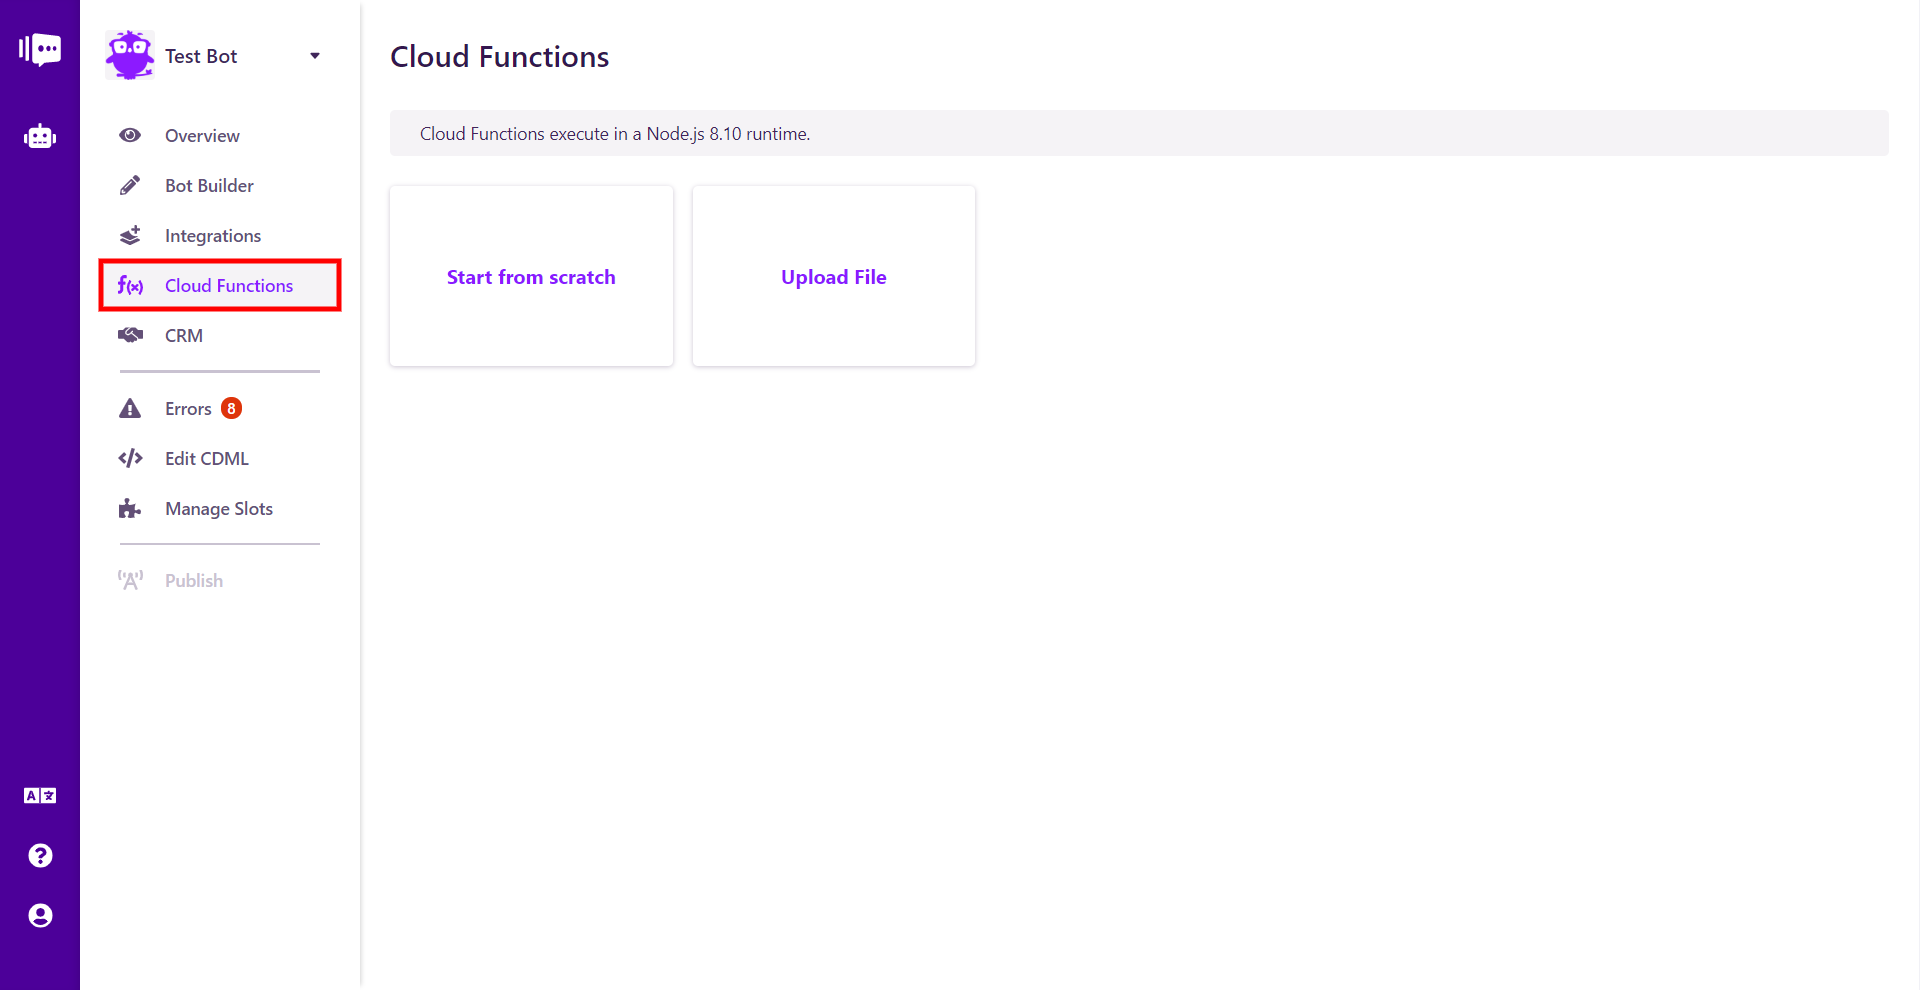 The Cloud Function Page on First Visit